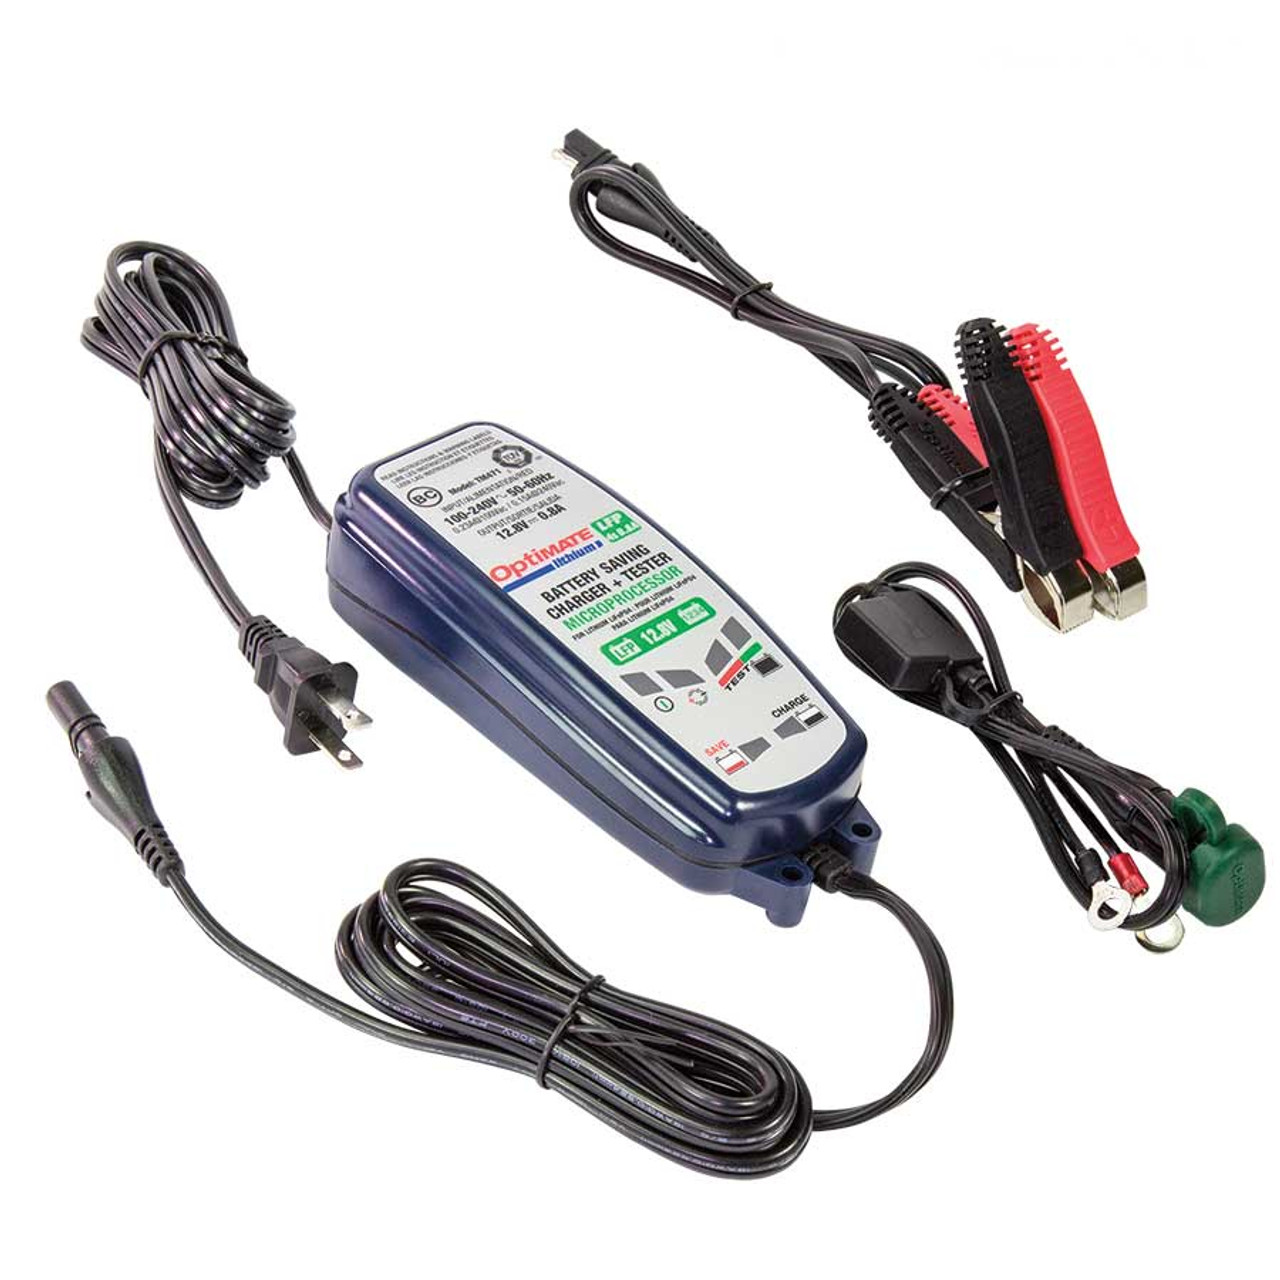 OptiMate® TM-471 Lithium Ion Battery Charger - .8 Amp, Works with All 12  Volt Batteries